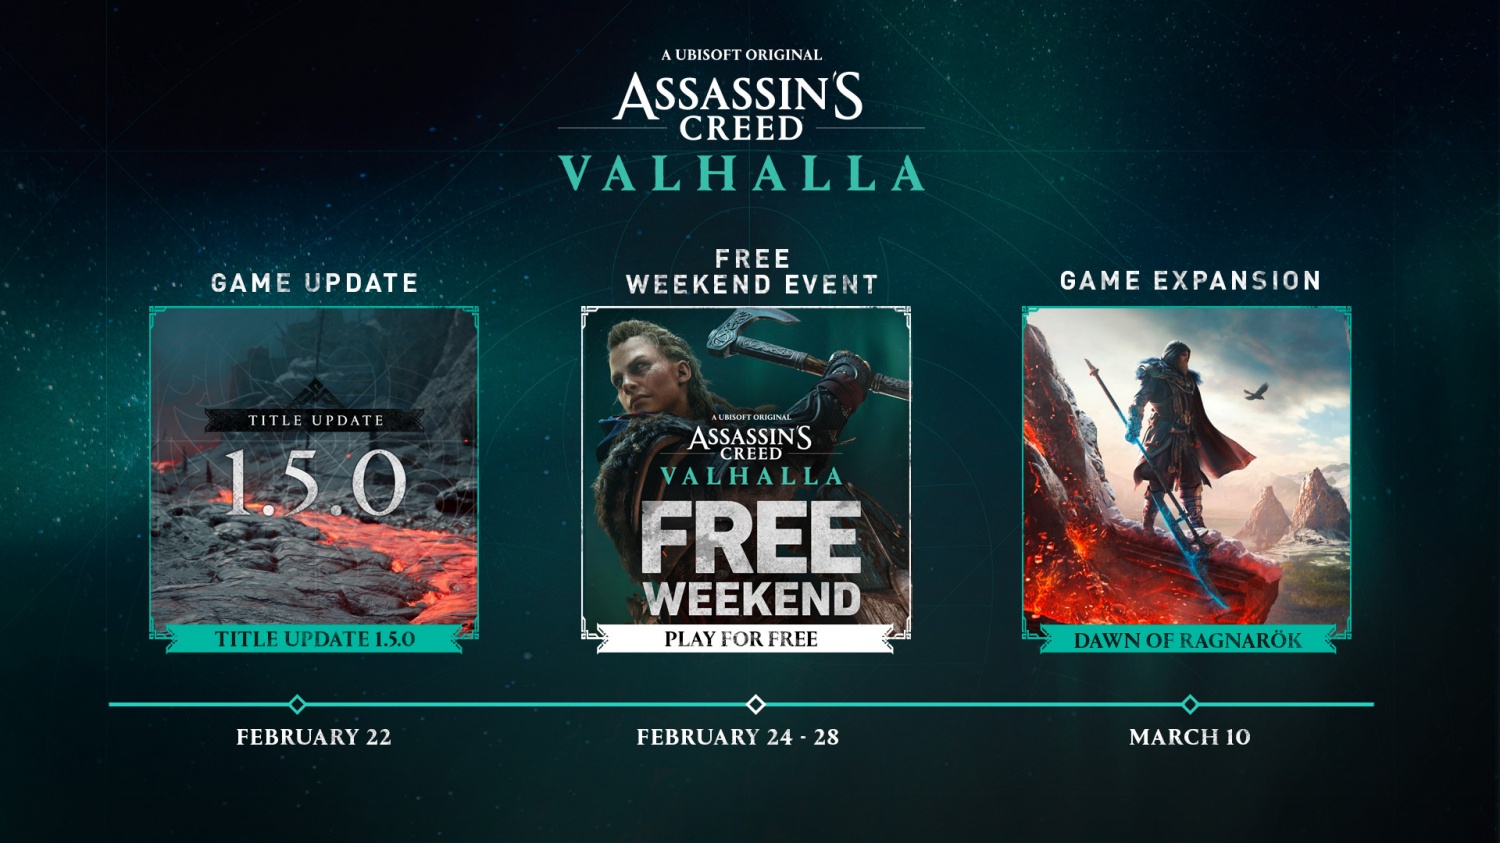  The World of Assassin's Creed Valhalla: Journey to the